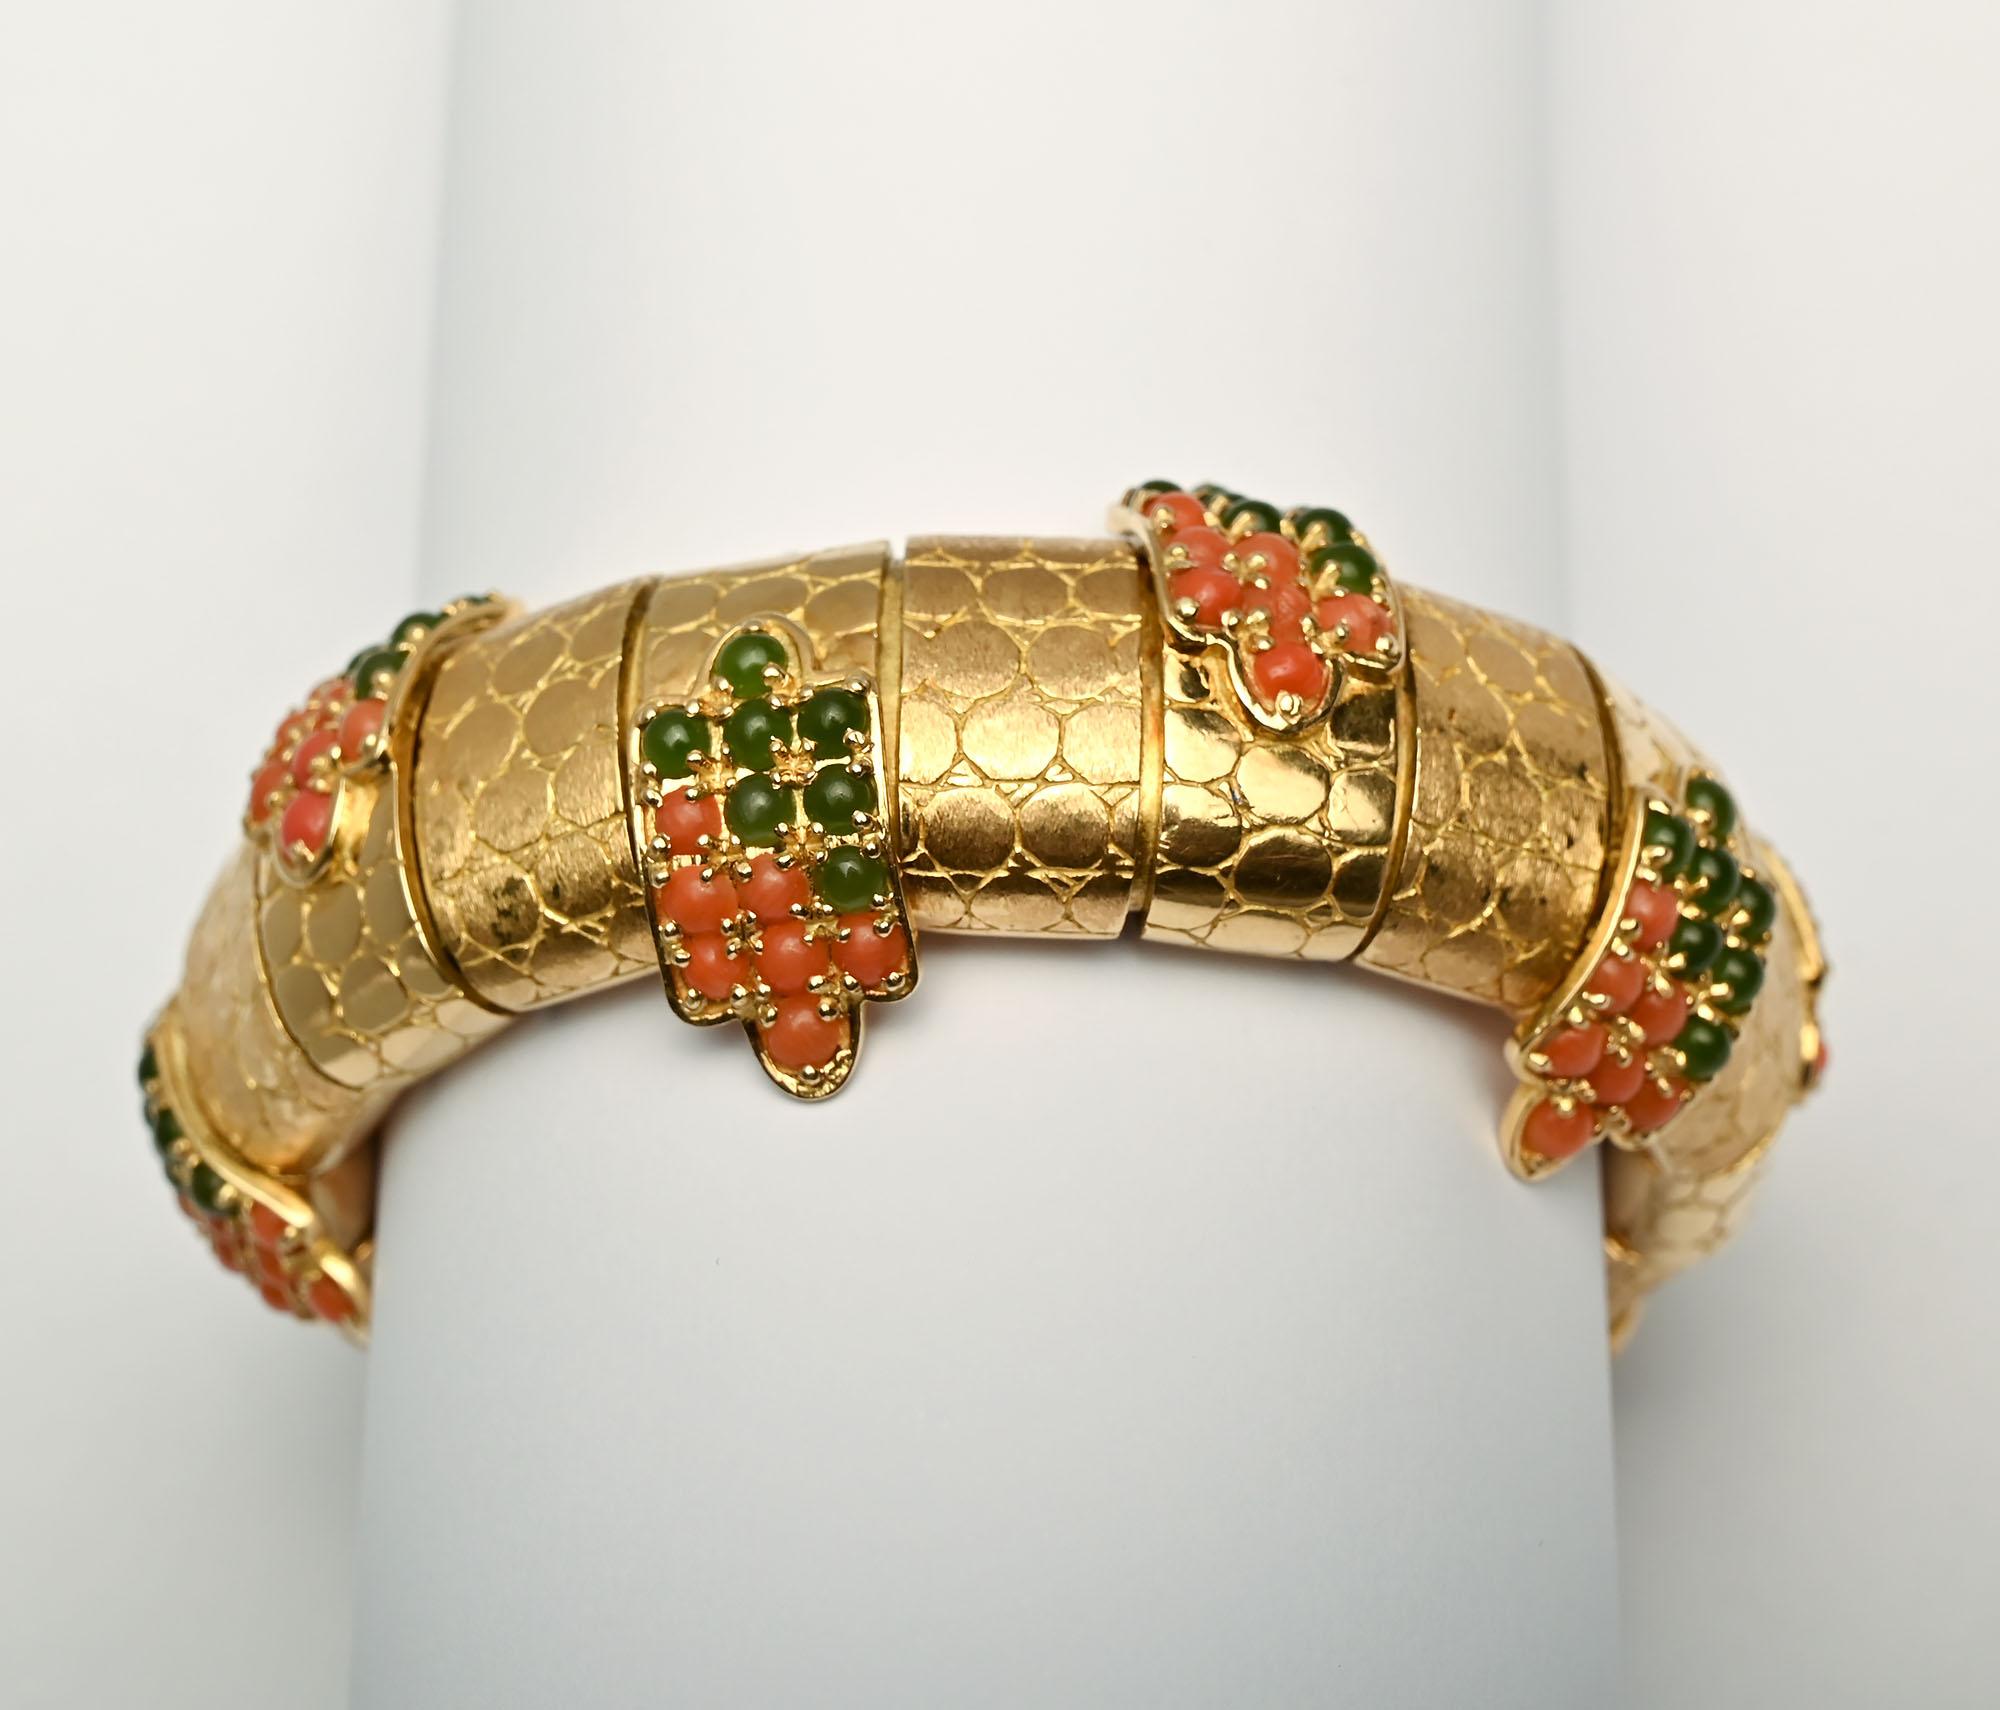 Absolutely stunning and unusual heavy gold bracelet by Pomellato. The bracelet has 19 arched links . Every other one is embellished with emeralds and coral. All of the links have an incised pattern of circles abutting one another. The clasp is